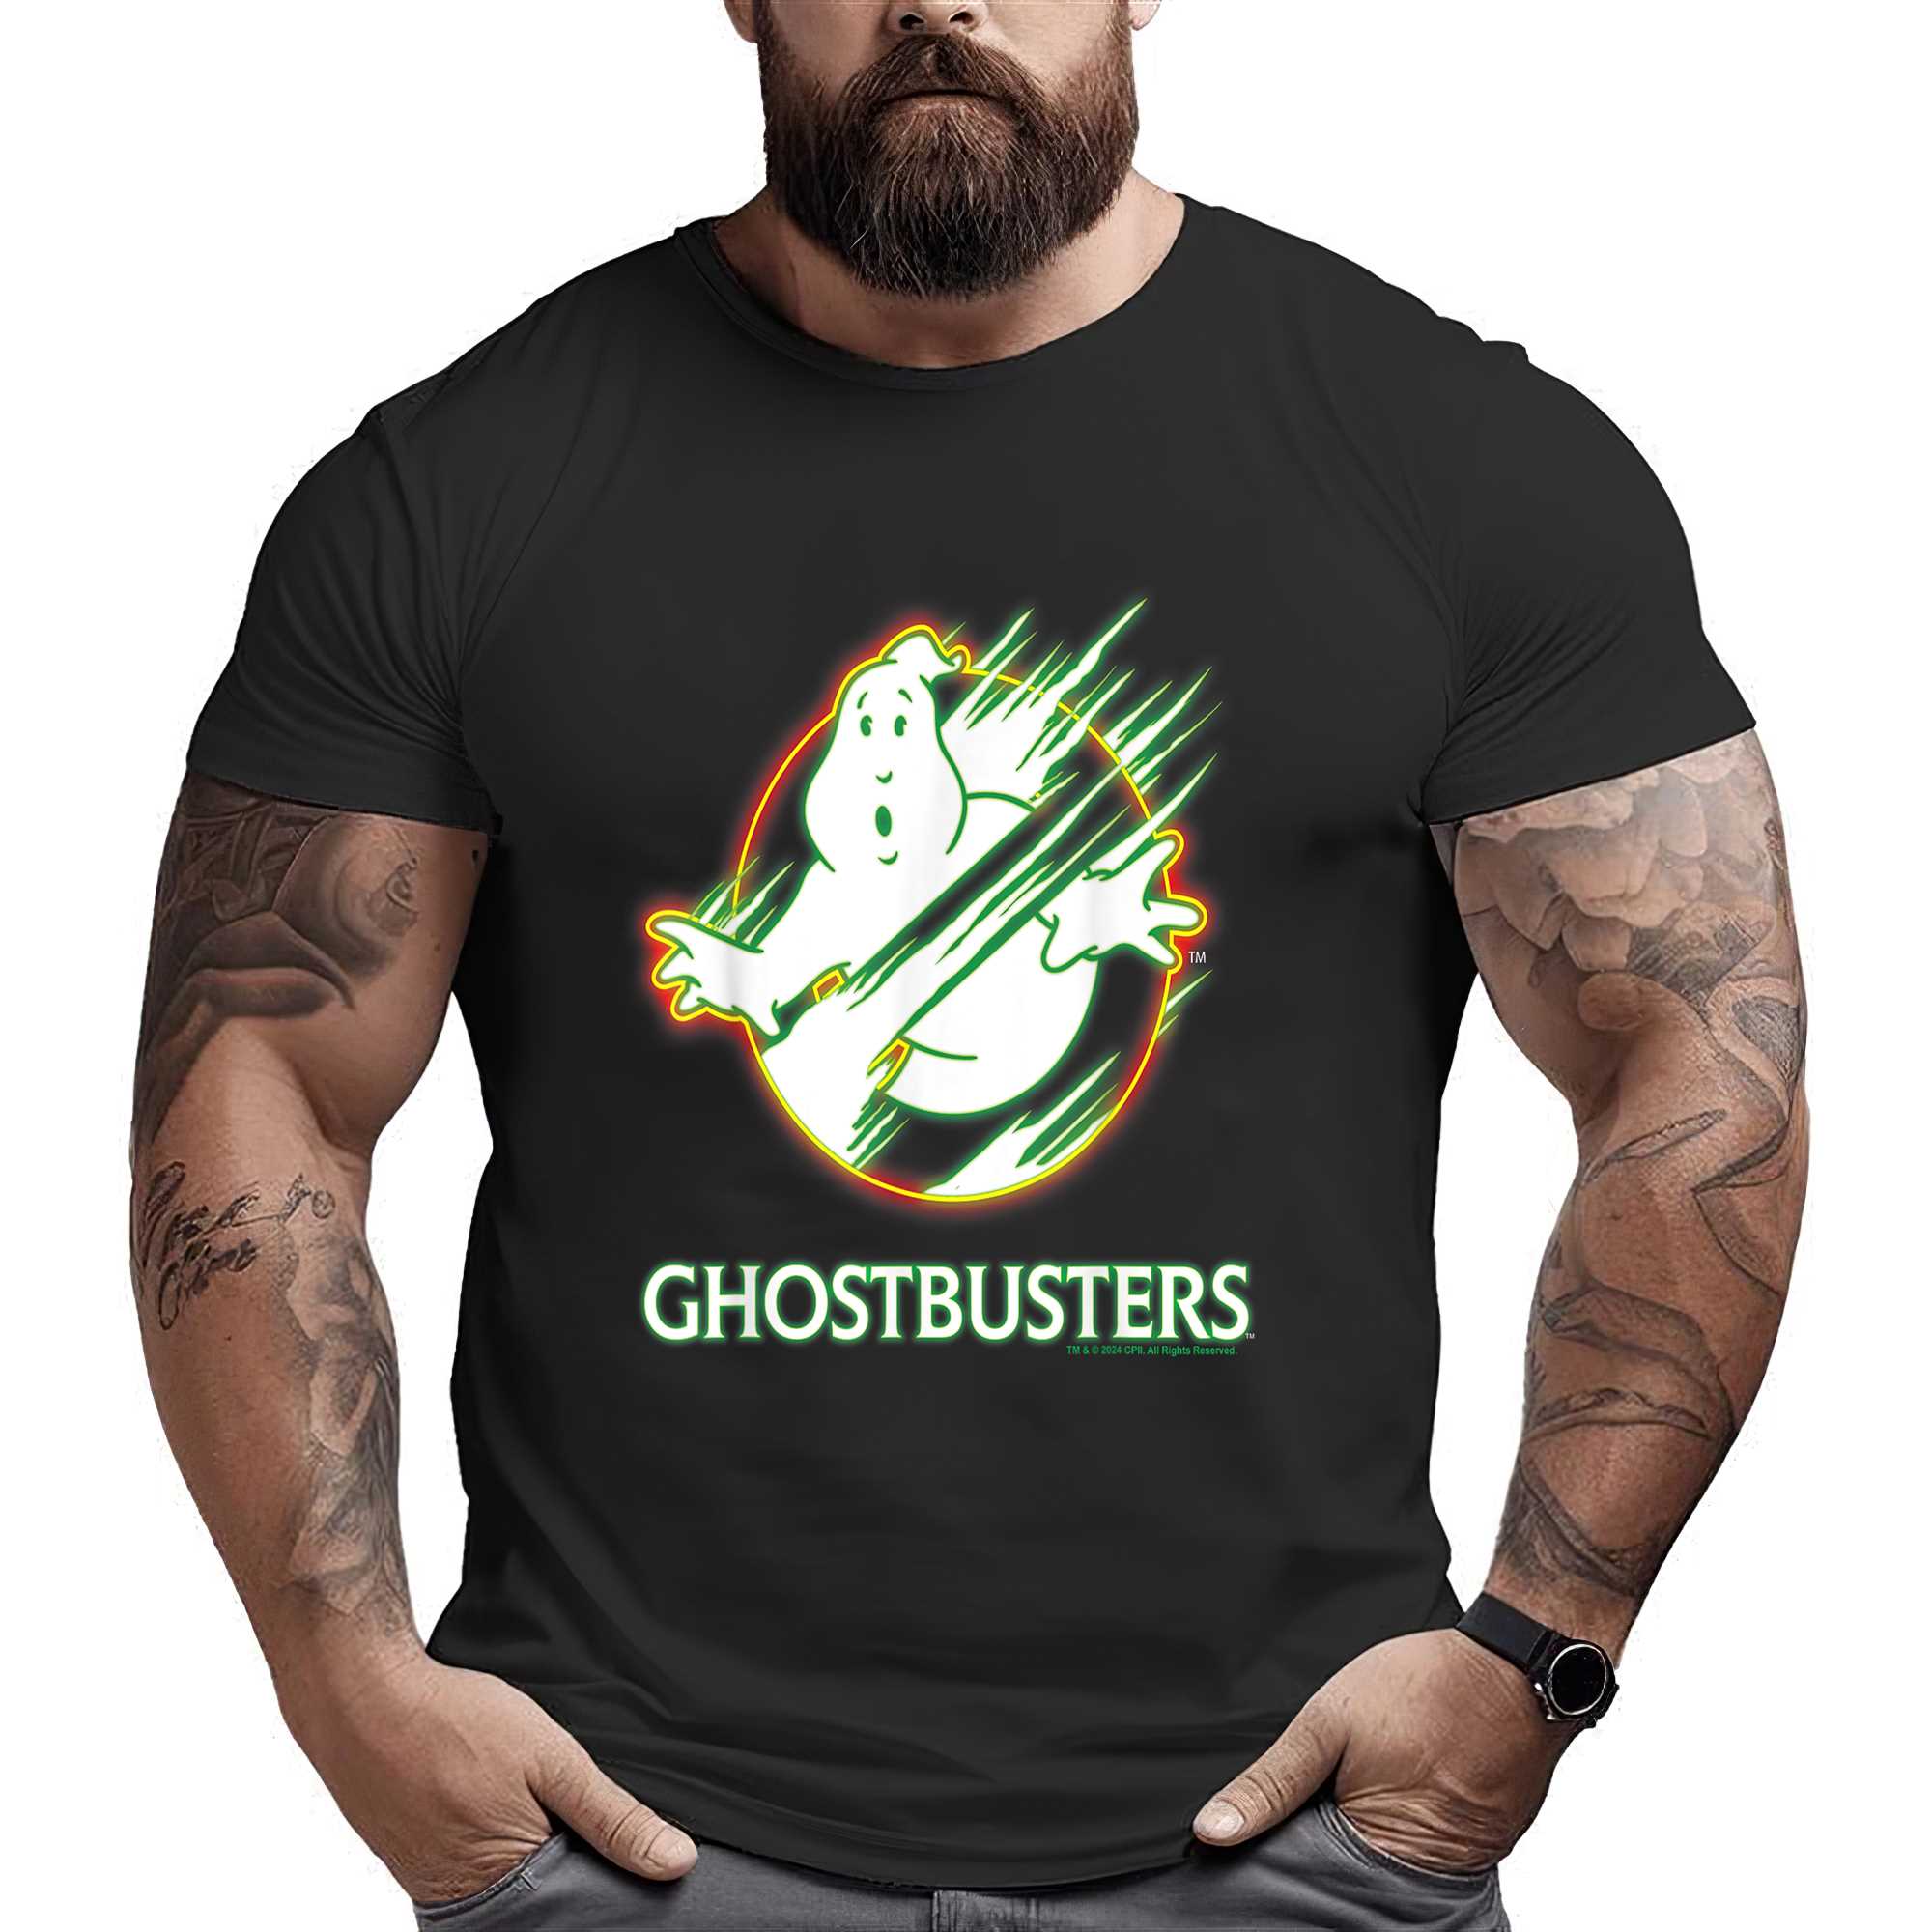 Ghostbusters 2 – Neon Ghost Logo T-shirt